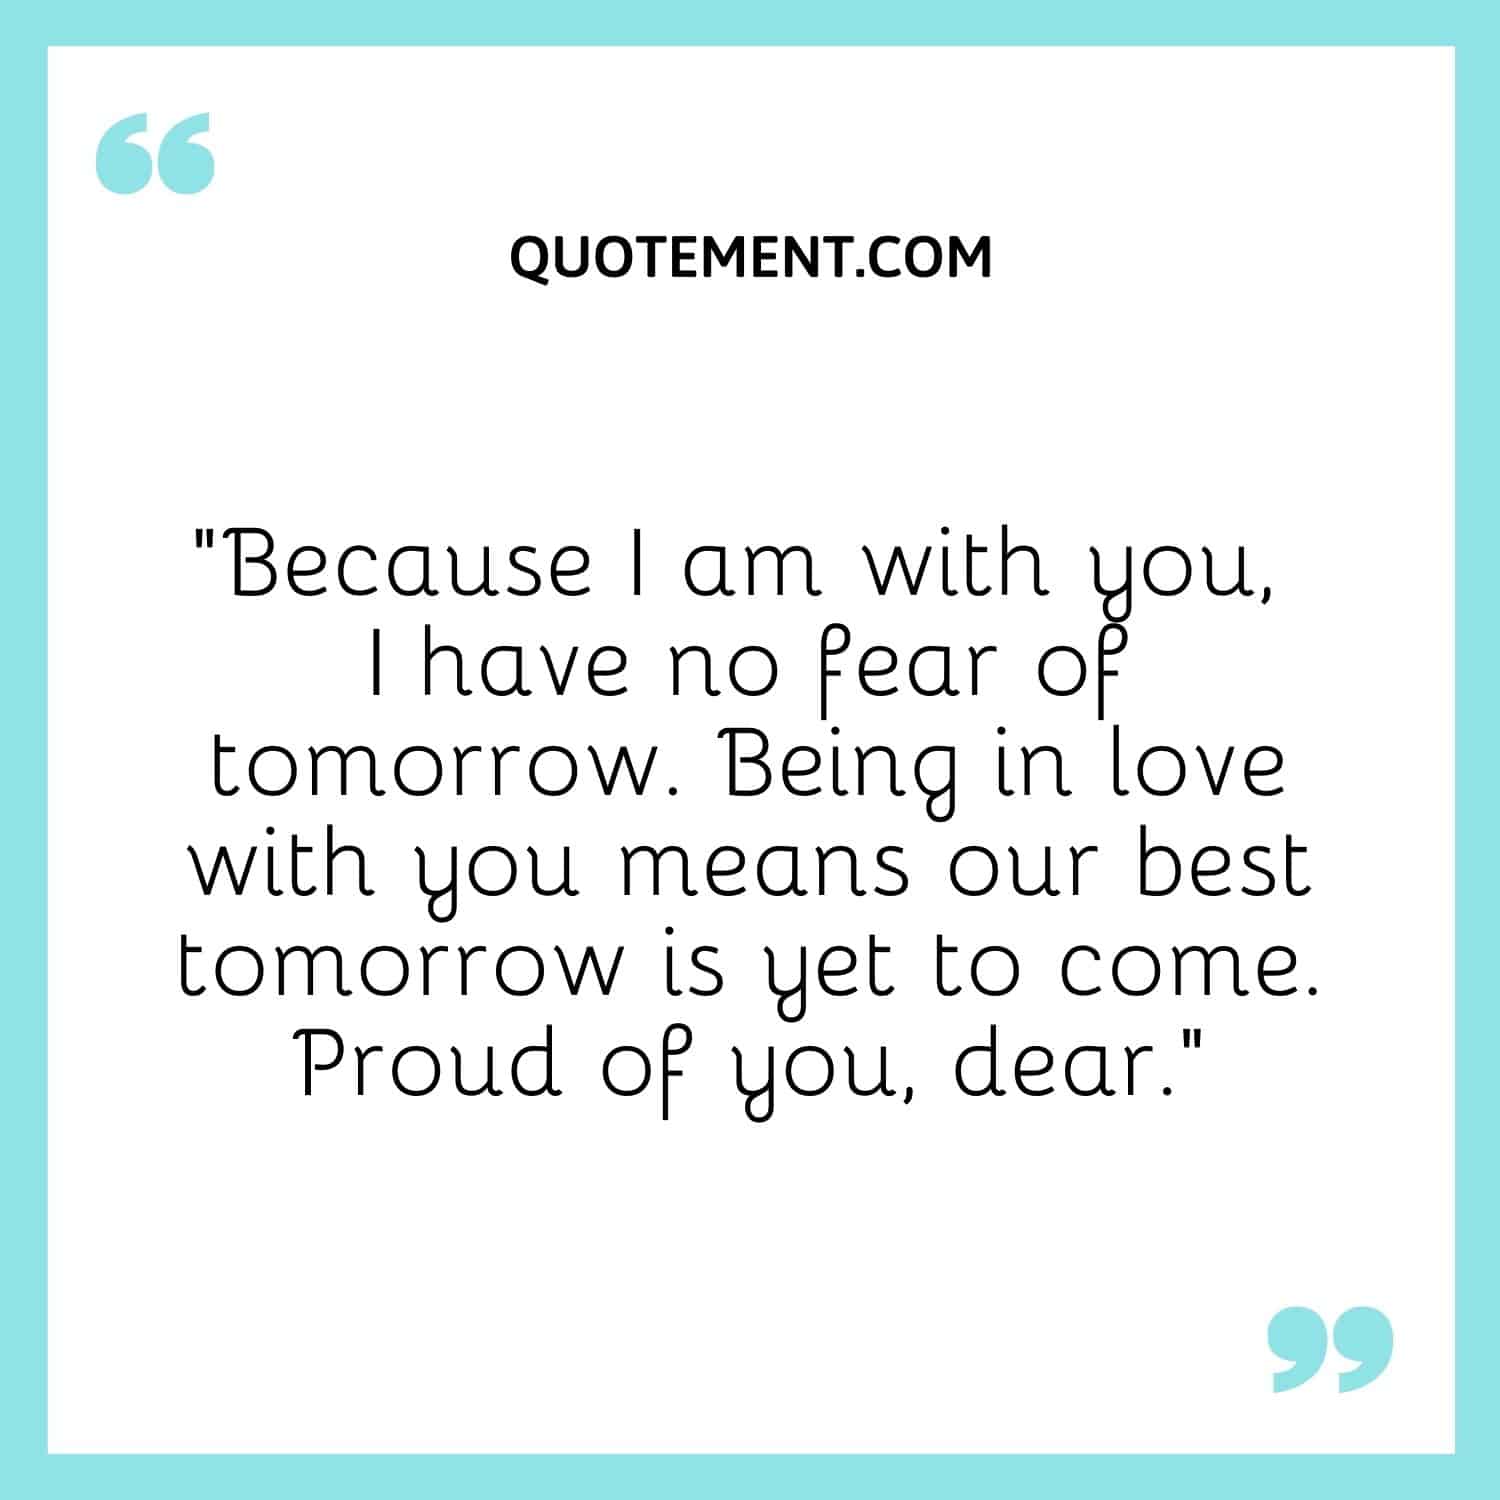 “Because I am with you, I have no fear of tomorrow. Being in love with you means our best tomorrow is yet to come. Proud of you, dear.”